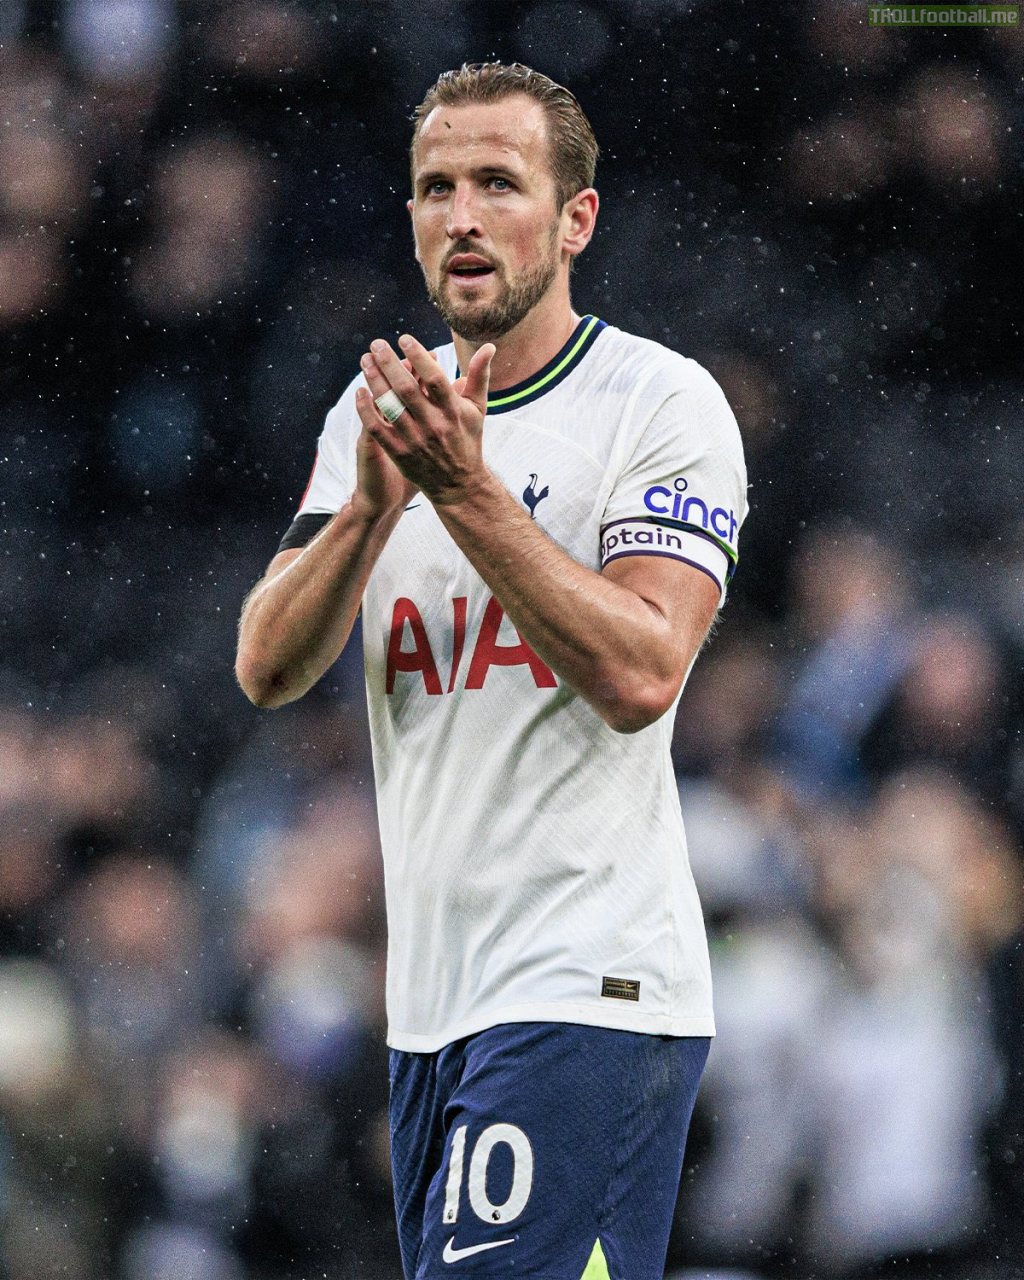 Real Madrid are interested in signing Harry Kane in the summer, when his contract only has one year remaining. (Source: Todo Fichajes)